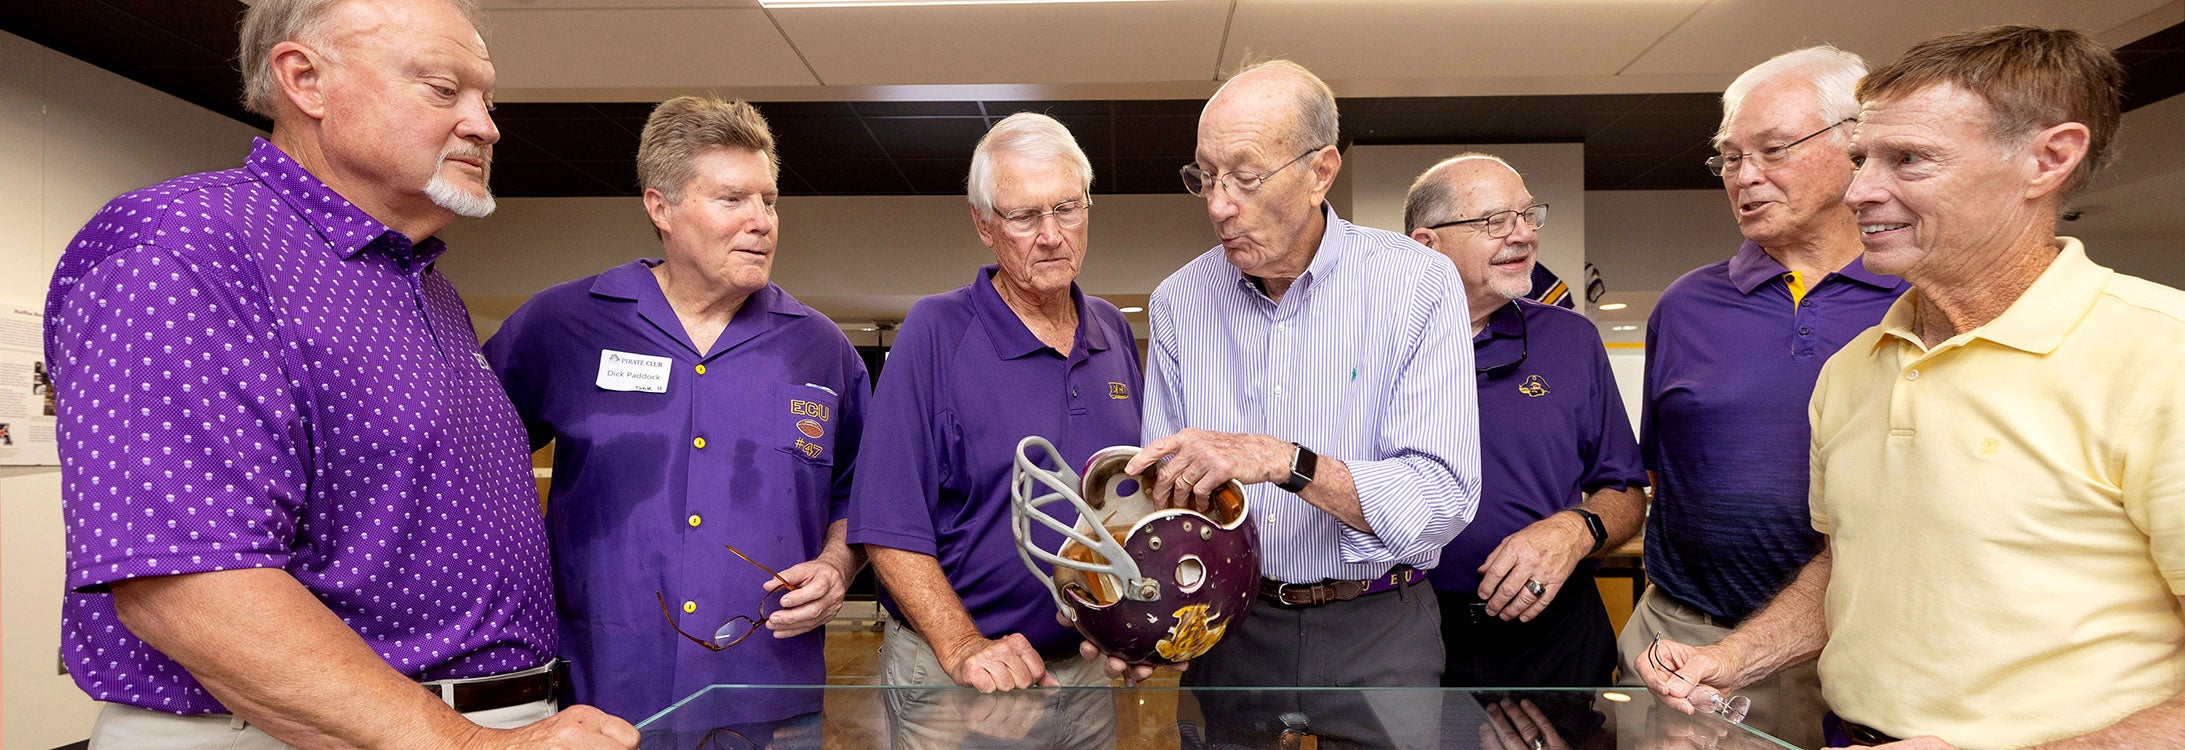 Grover Truslow talks to East Carolina University football teammates about the helmet he wore in the 1970 ECU-Marshall game. ECU and Marshall play this weekend at 4 p.m. at Dowdy-Ficklen Stadium. (ECU photo by Rhett Butler)